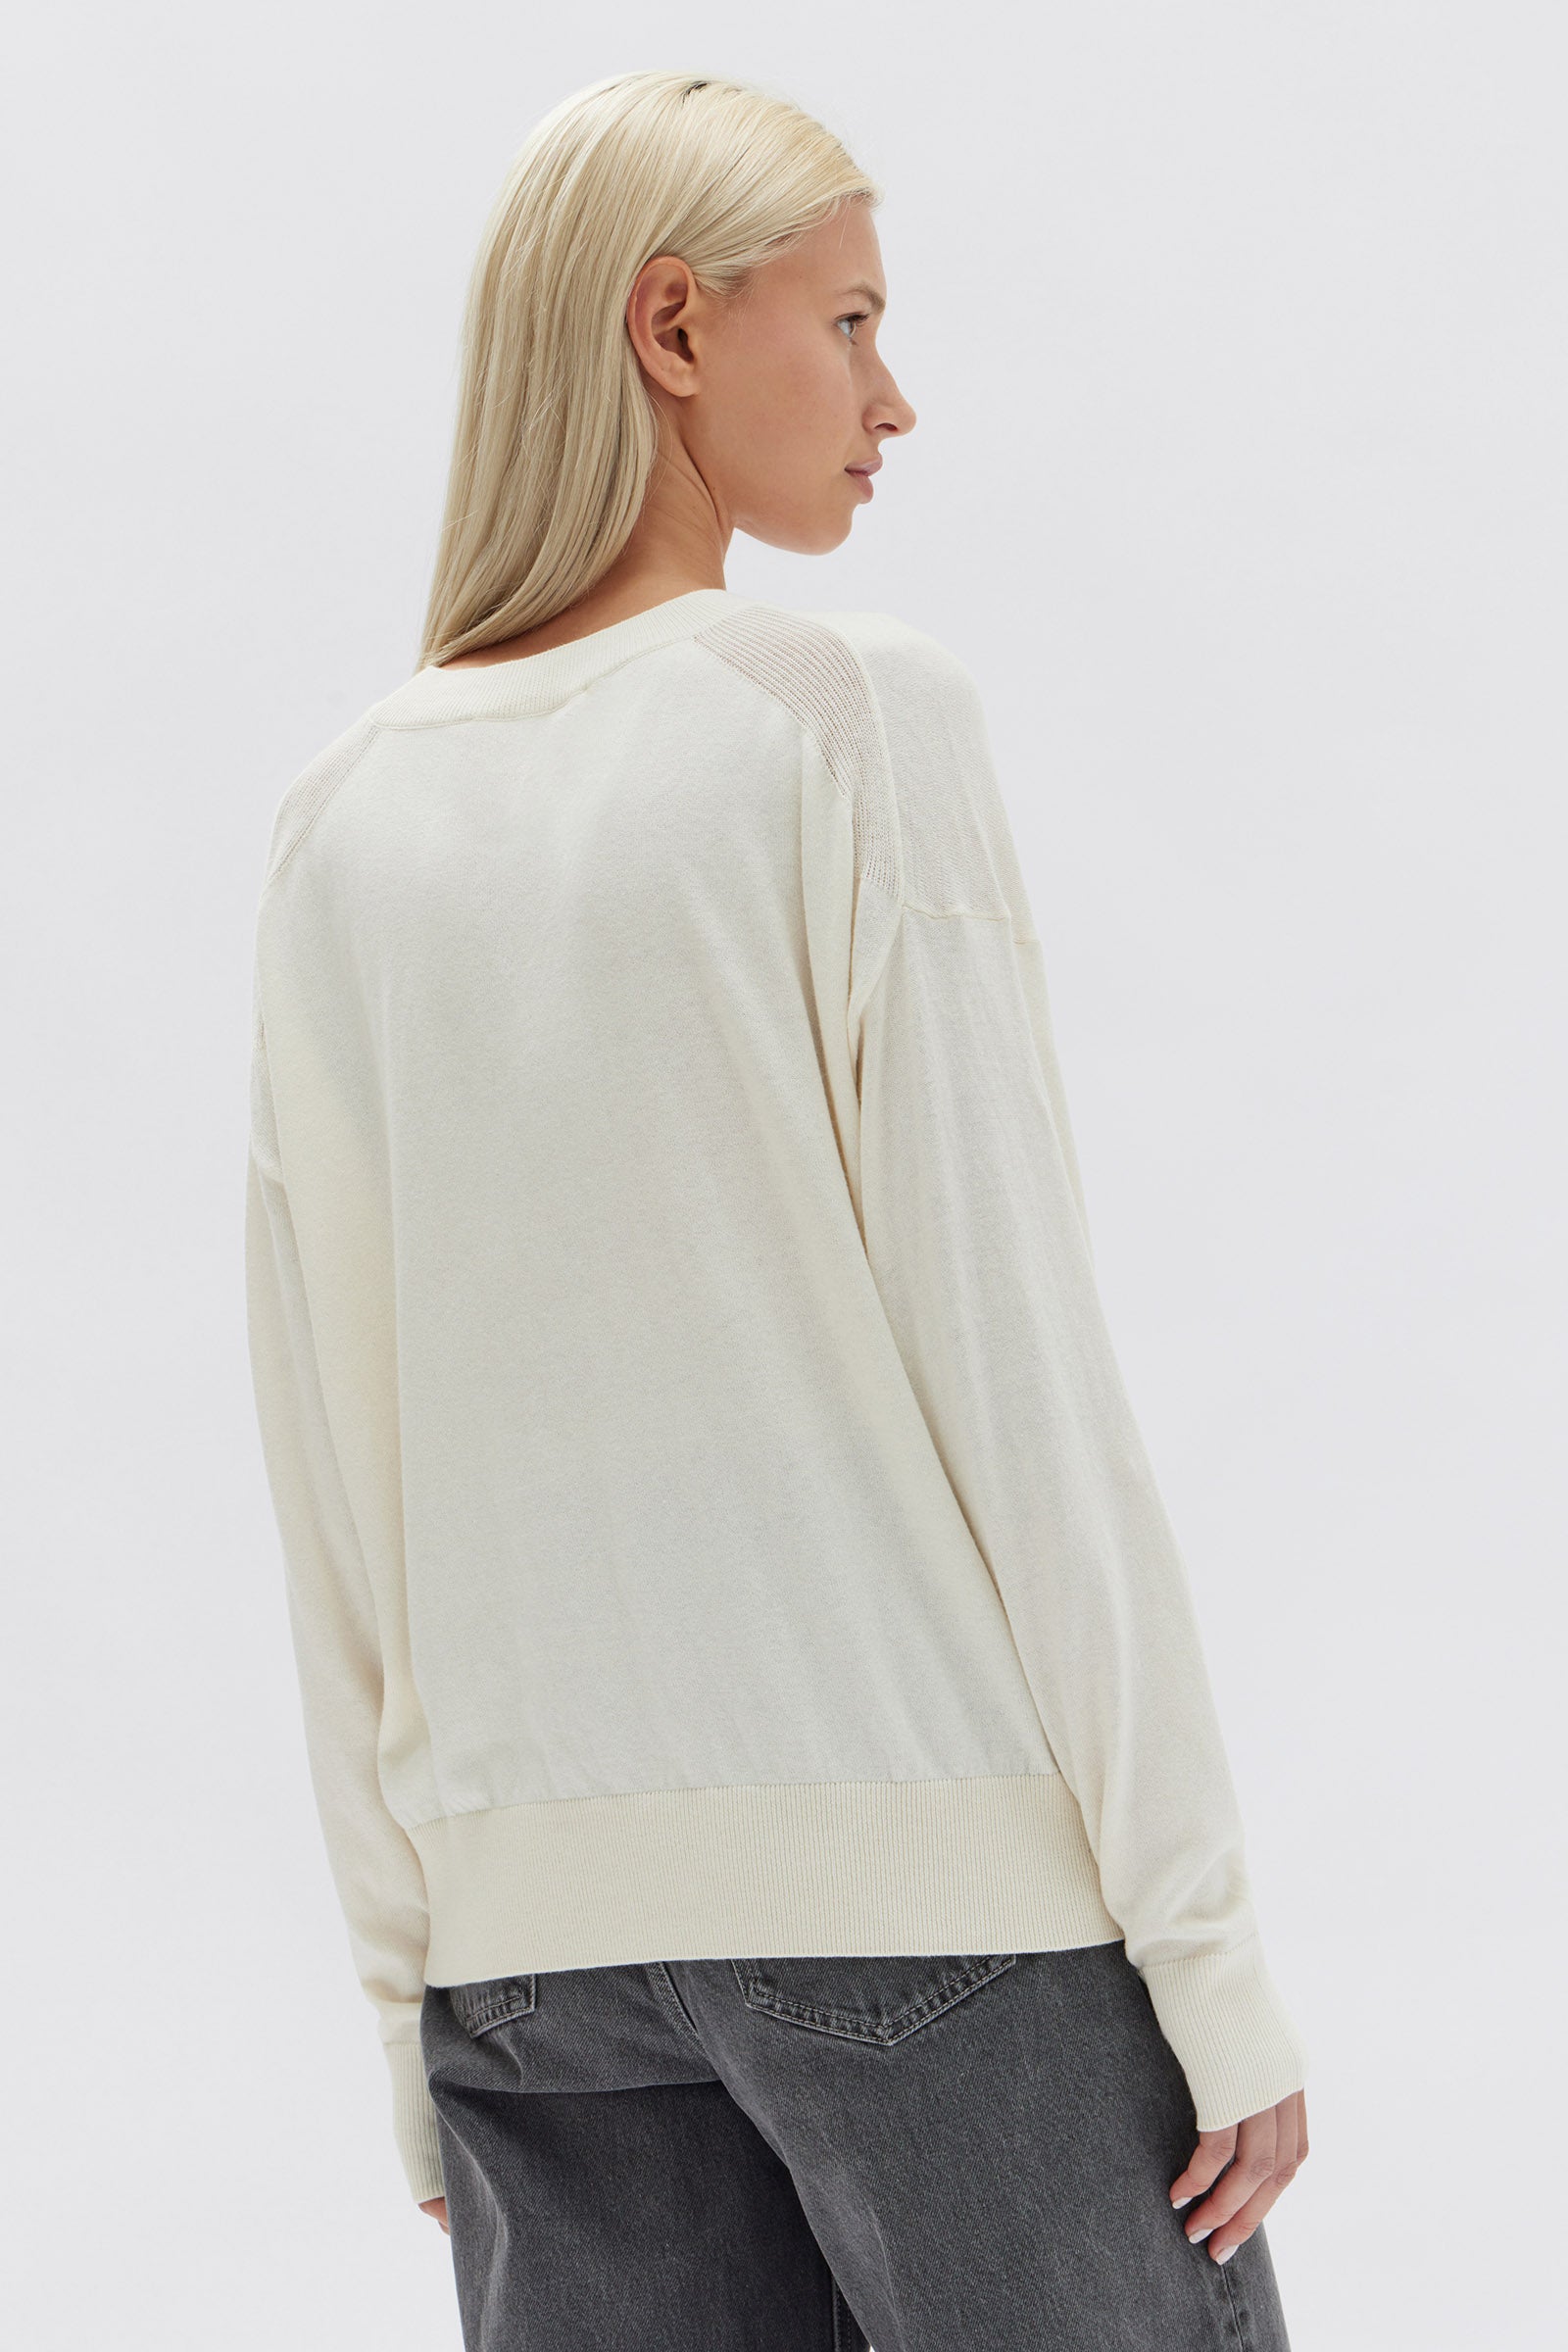 Assembly Label | New Cotton Cashmere Lounge Sweater - Cream